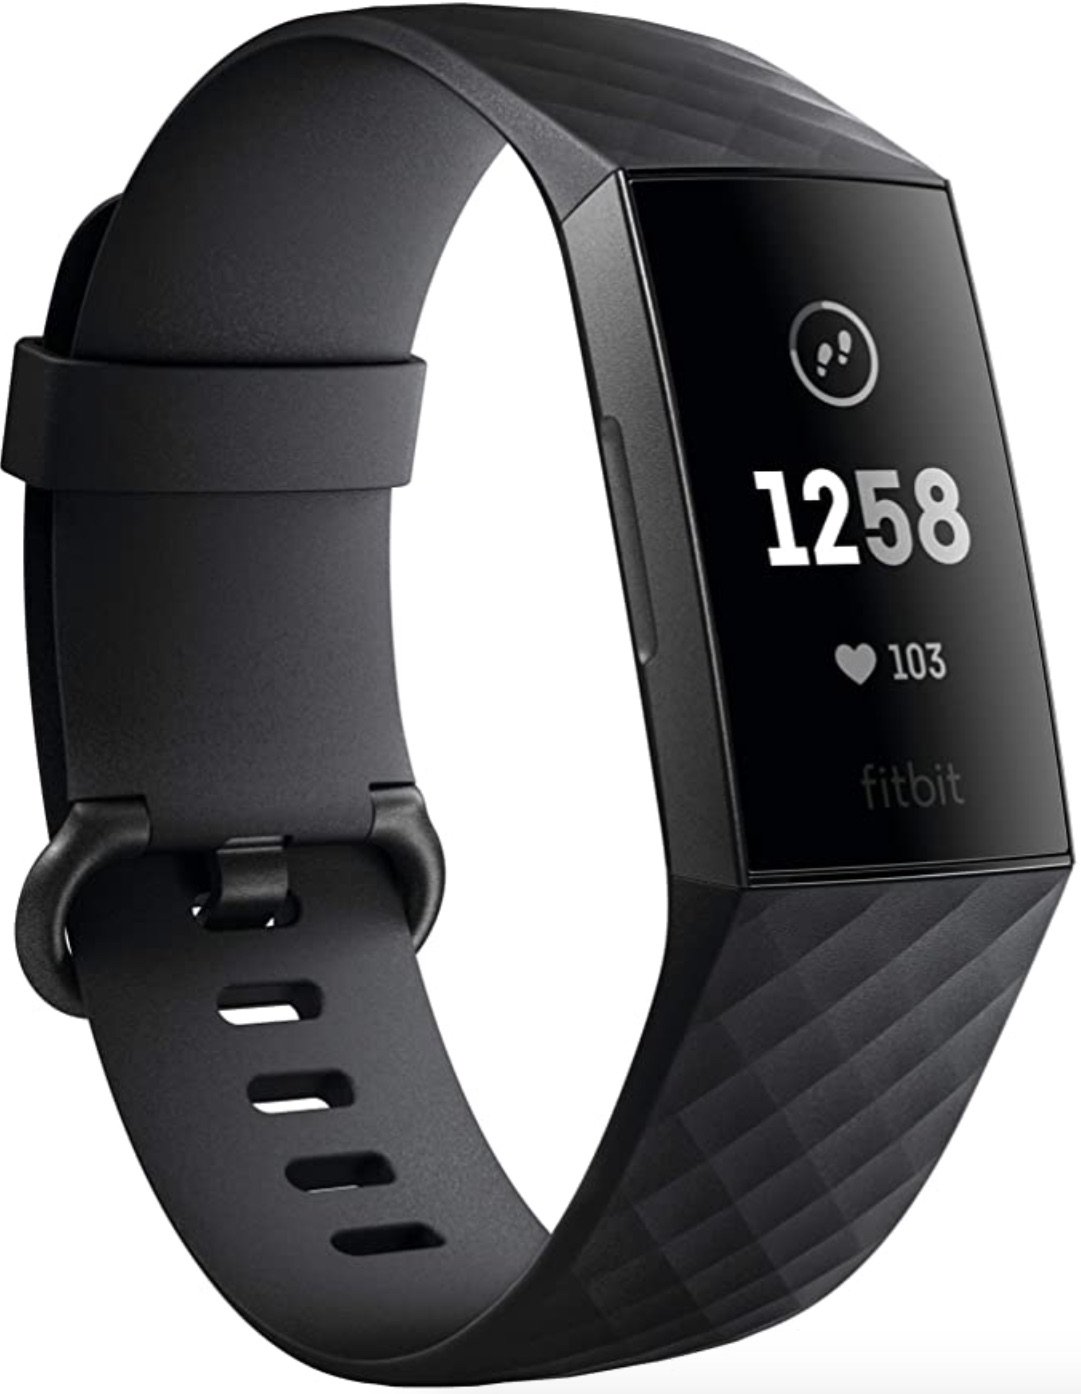 Fitbit Charge 4 vs Fitbit Charge 3 